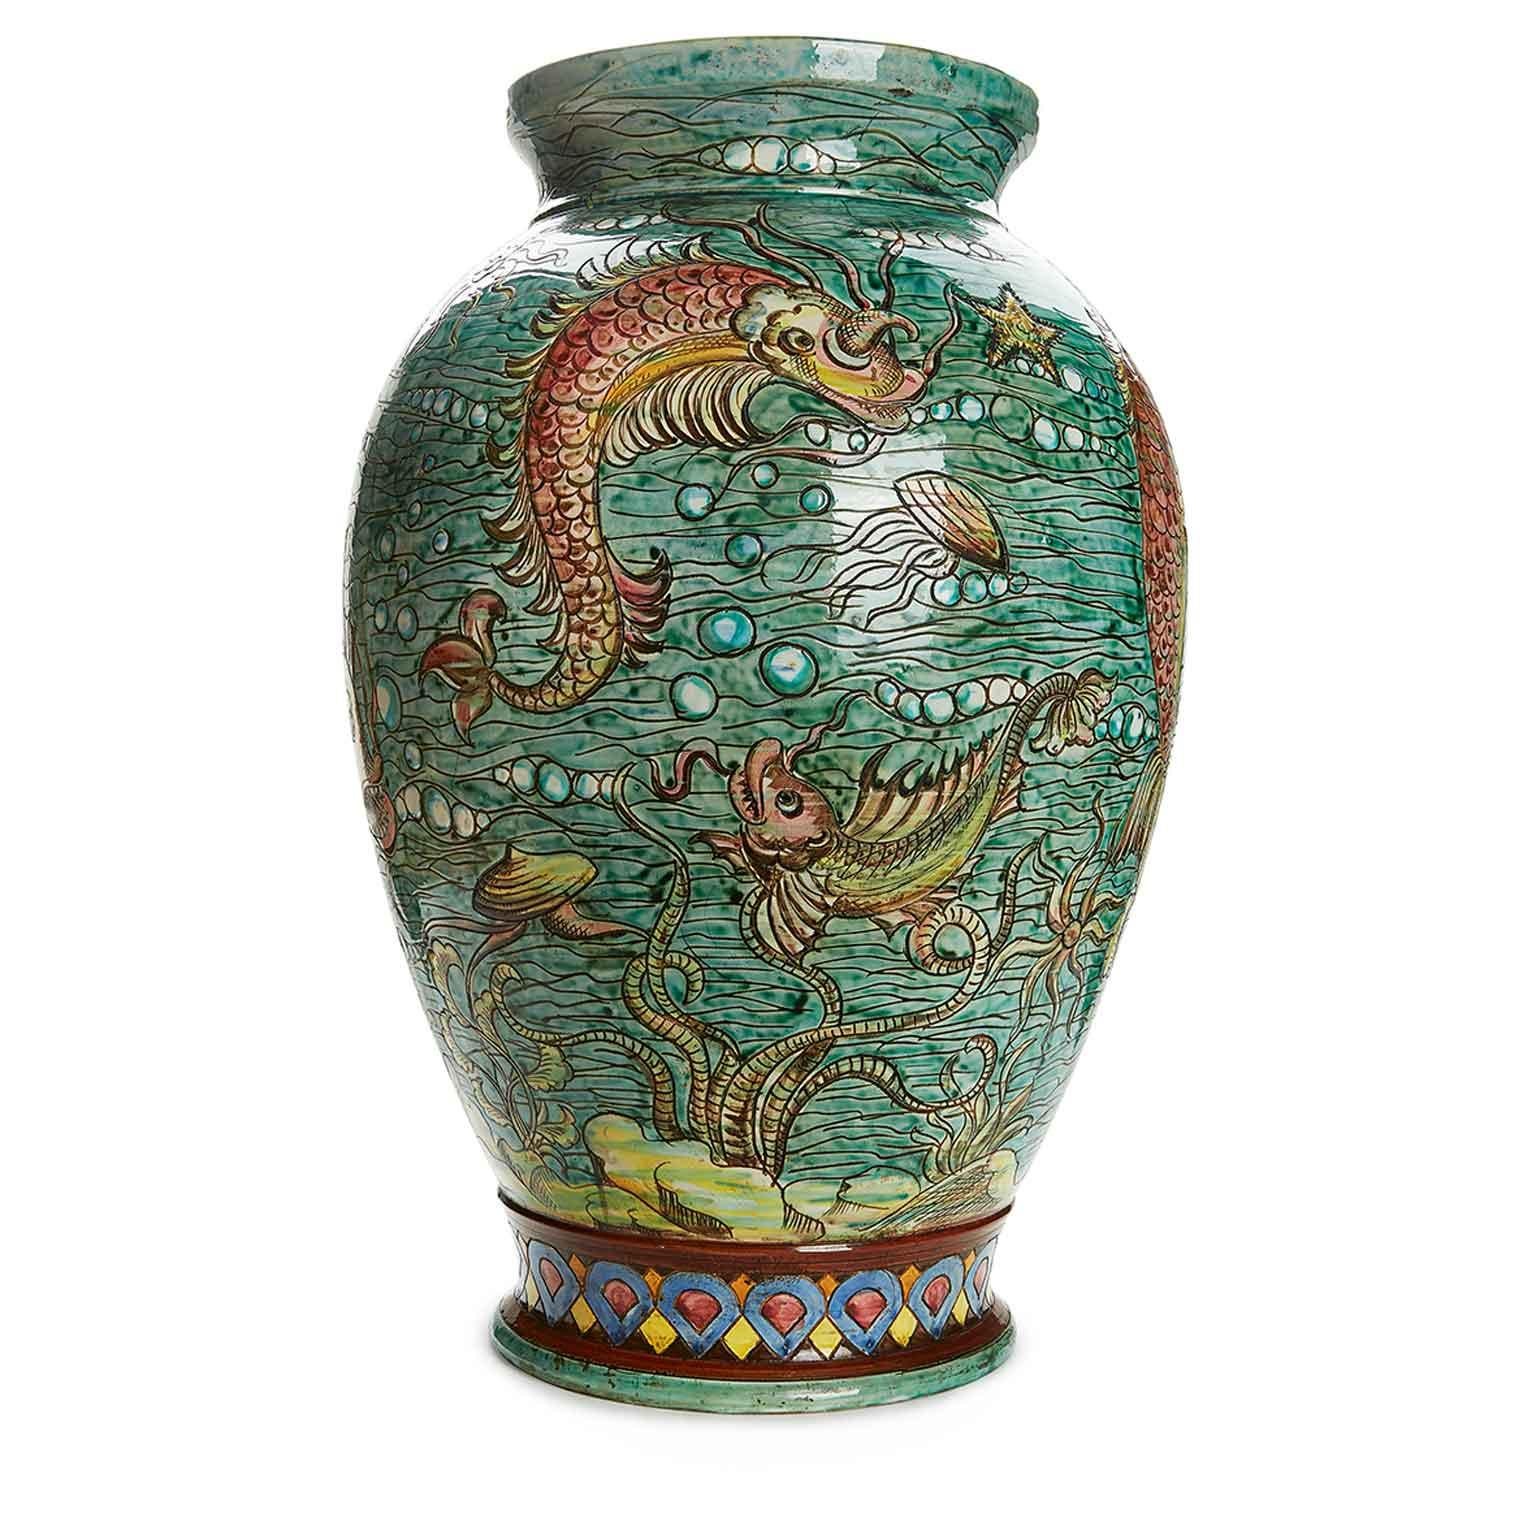 Italian Graffito Ceramic Umbrella Vase Decorated with Fishes and a Turquoise-Green Seabed habitat,  circa 1950. Large Umbrian-made ceramic vase as inferred from the graffito under the base Perugia Italy D625, is decorated in the colors of the